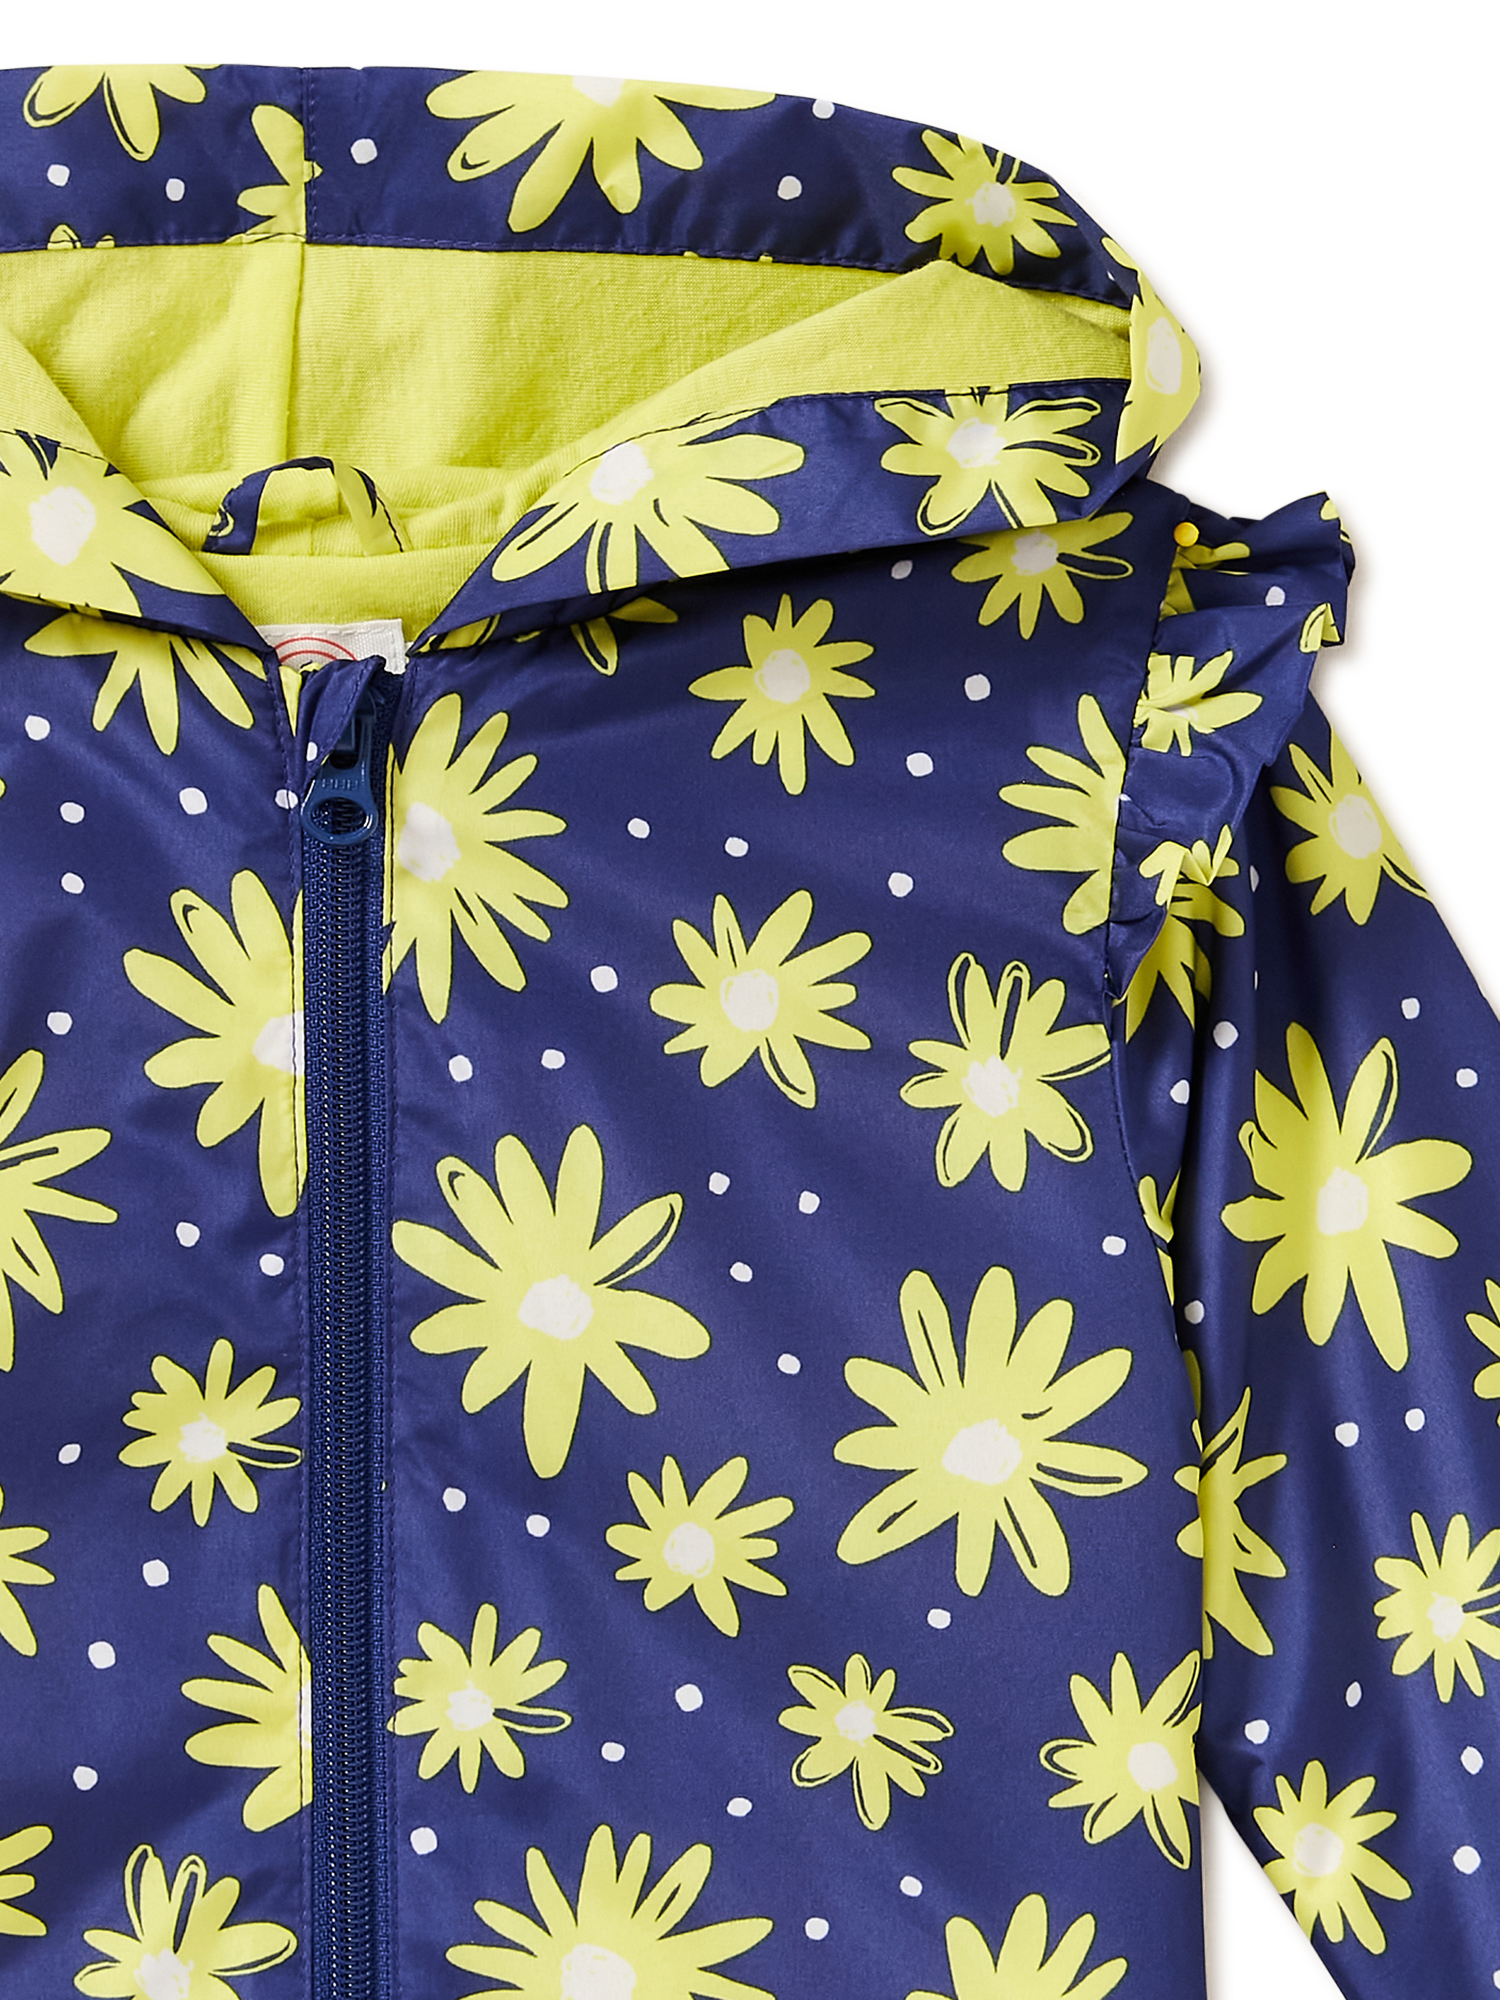 Wonder Nation Long Sleeve Relaxed Fit Printed Jacket (Infant or Toddler) 1 Pack - image 2 of 4